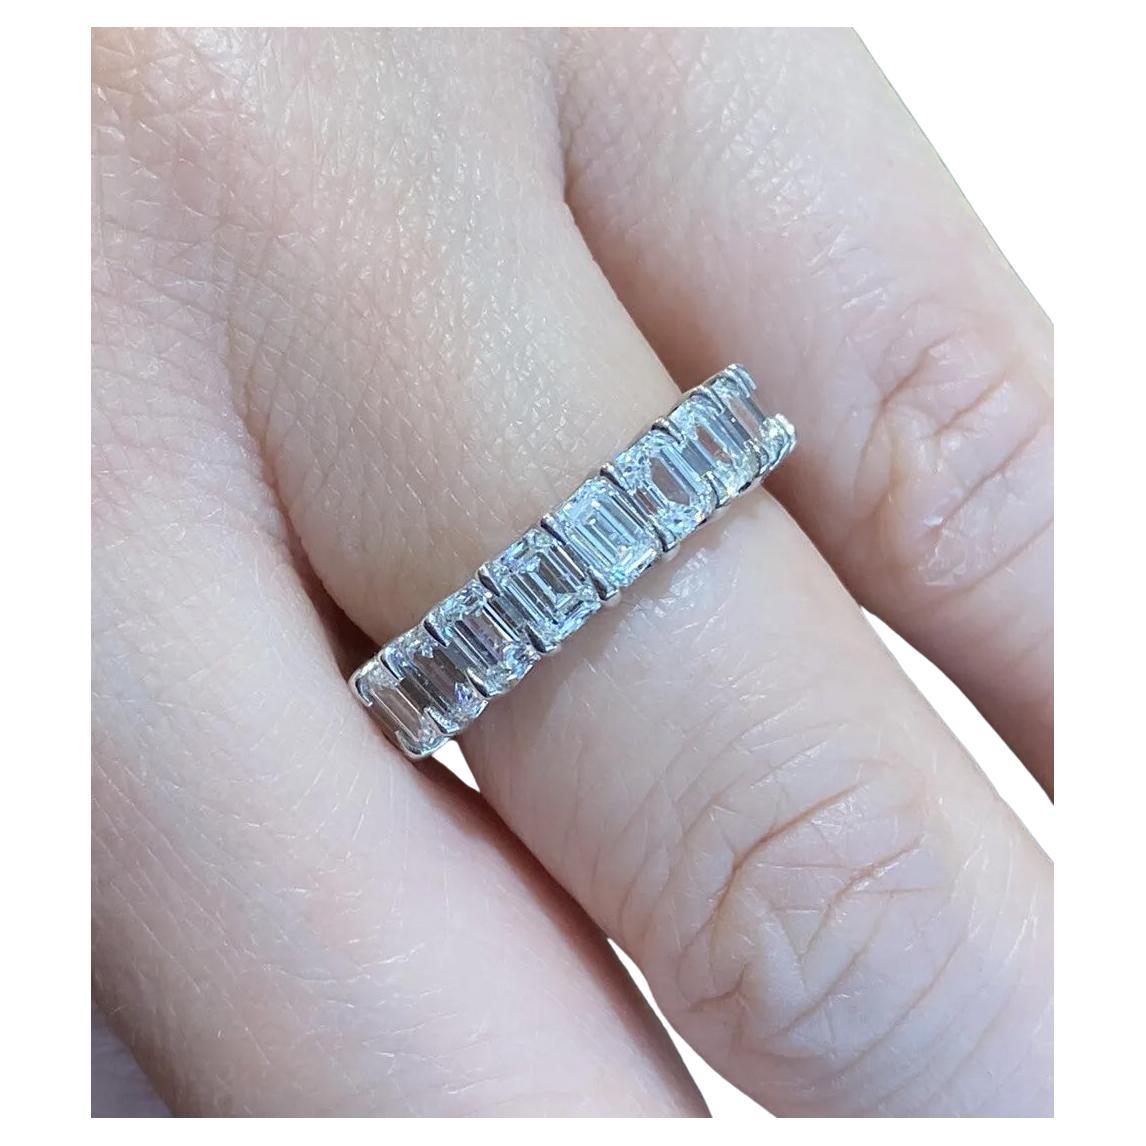 5.12 Carat Total Emerald Cut Diamond Eternity Band Ring in Platinum 5mm 6.25 For Sale